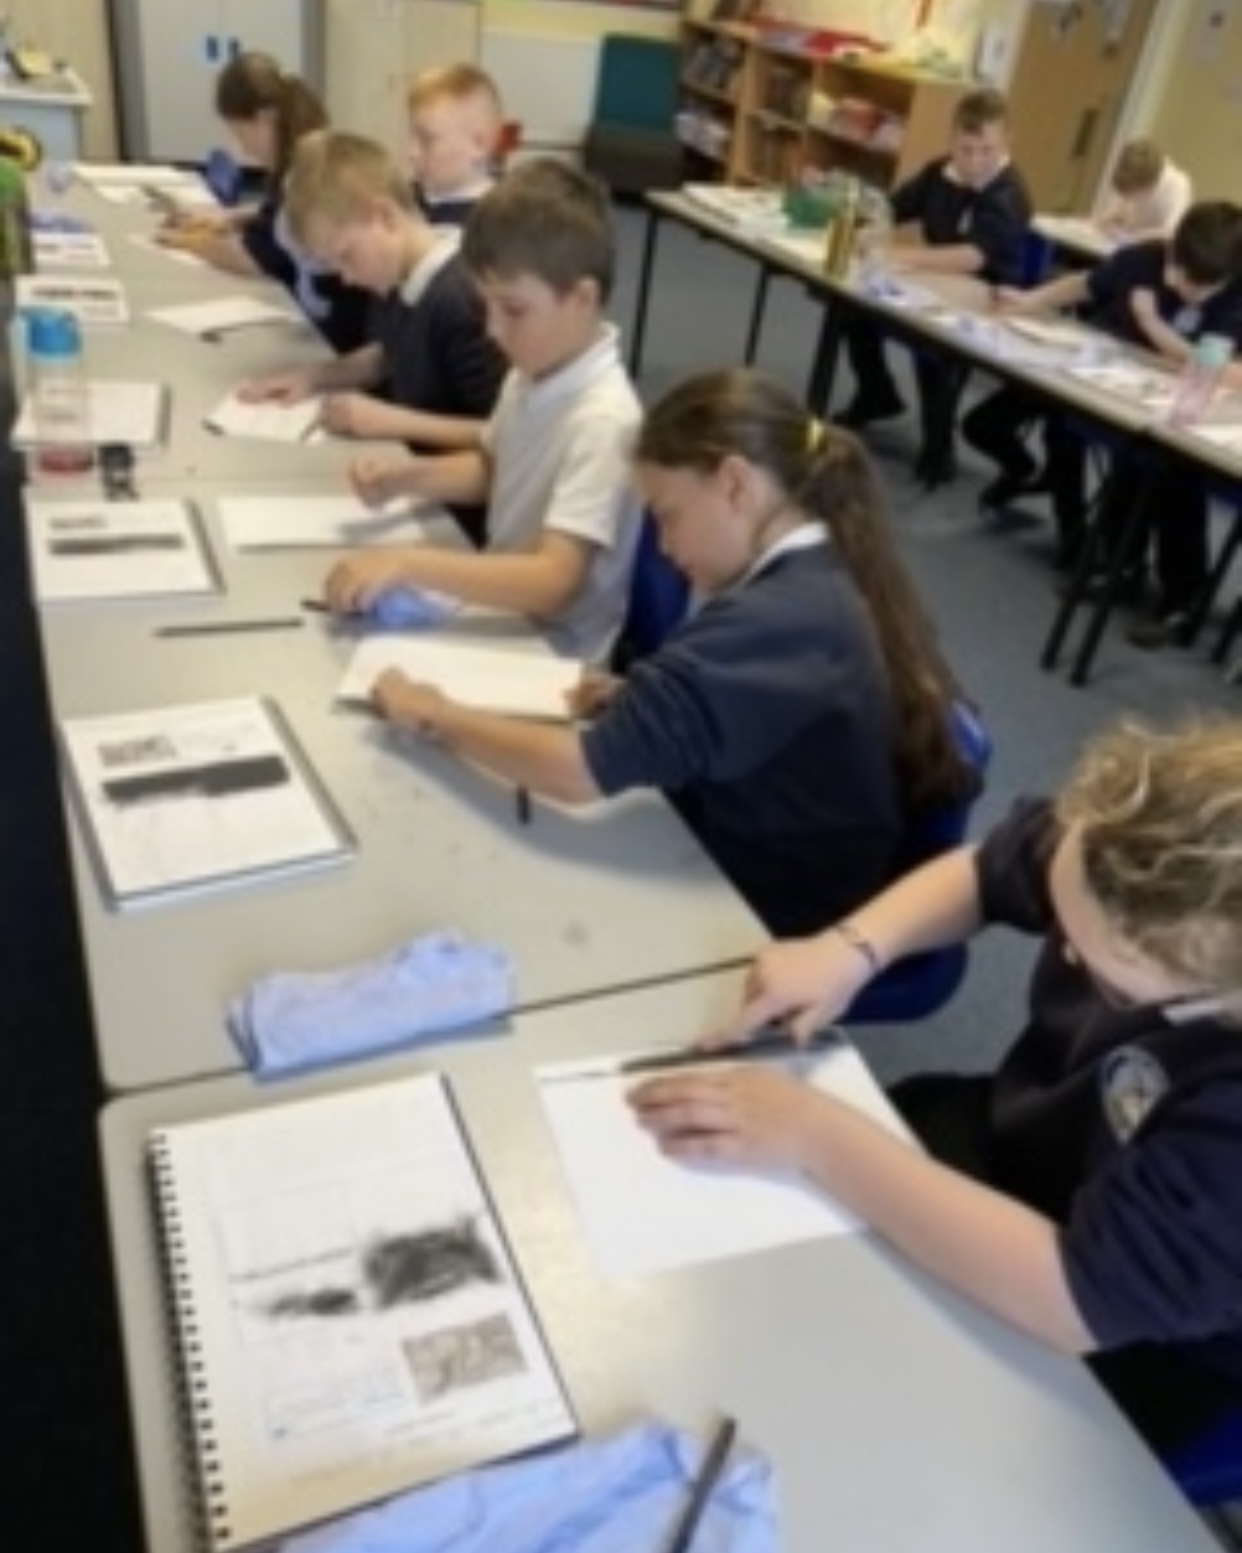 Year 6 children working on their charcoal drawings